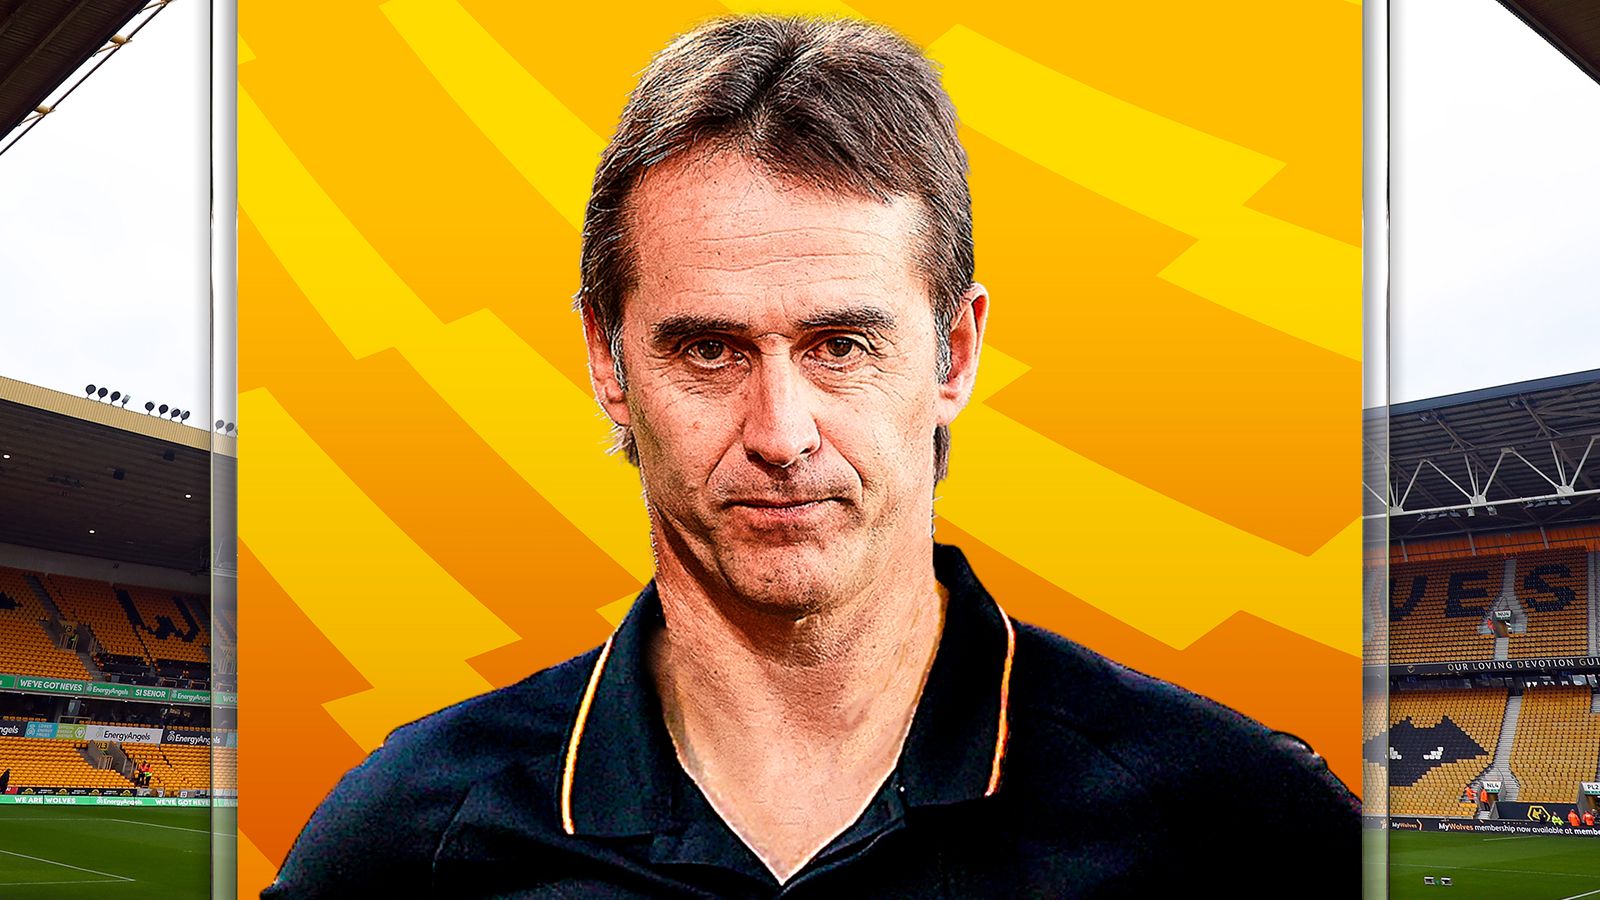 Julen Lopetegui exclusive interview: Wolves boss on Led Zeppelin, Johan Cruyff, and picking up the team's tab | Football News